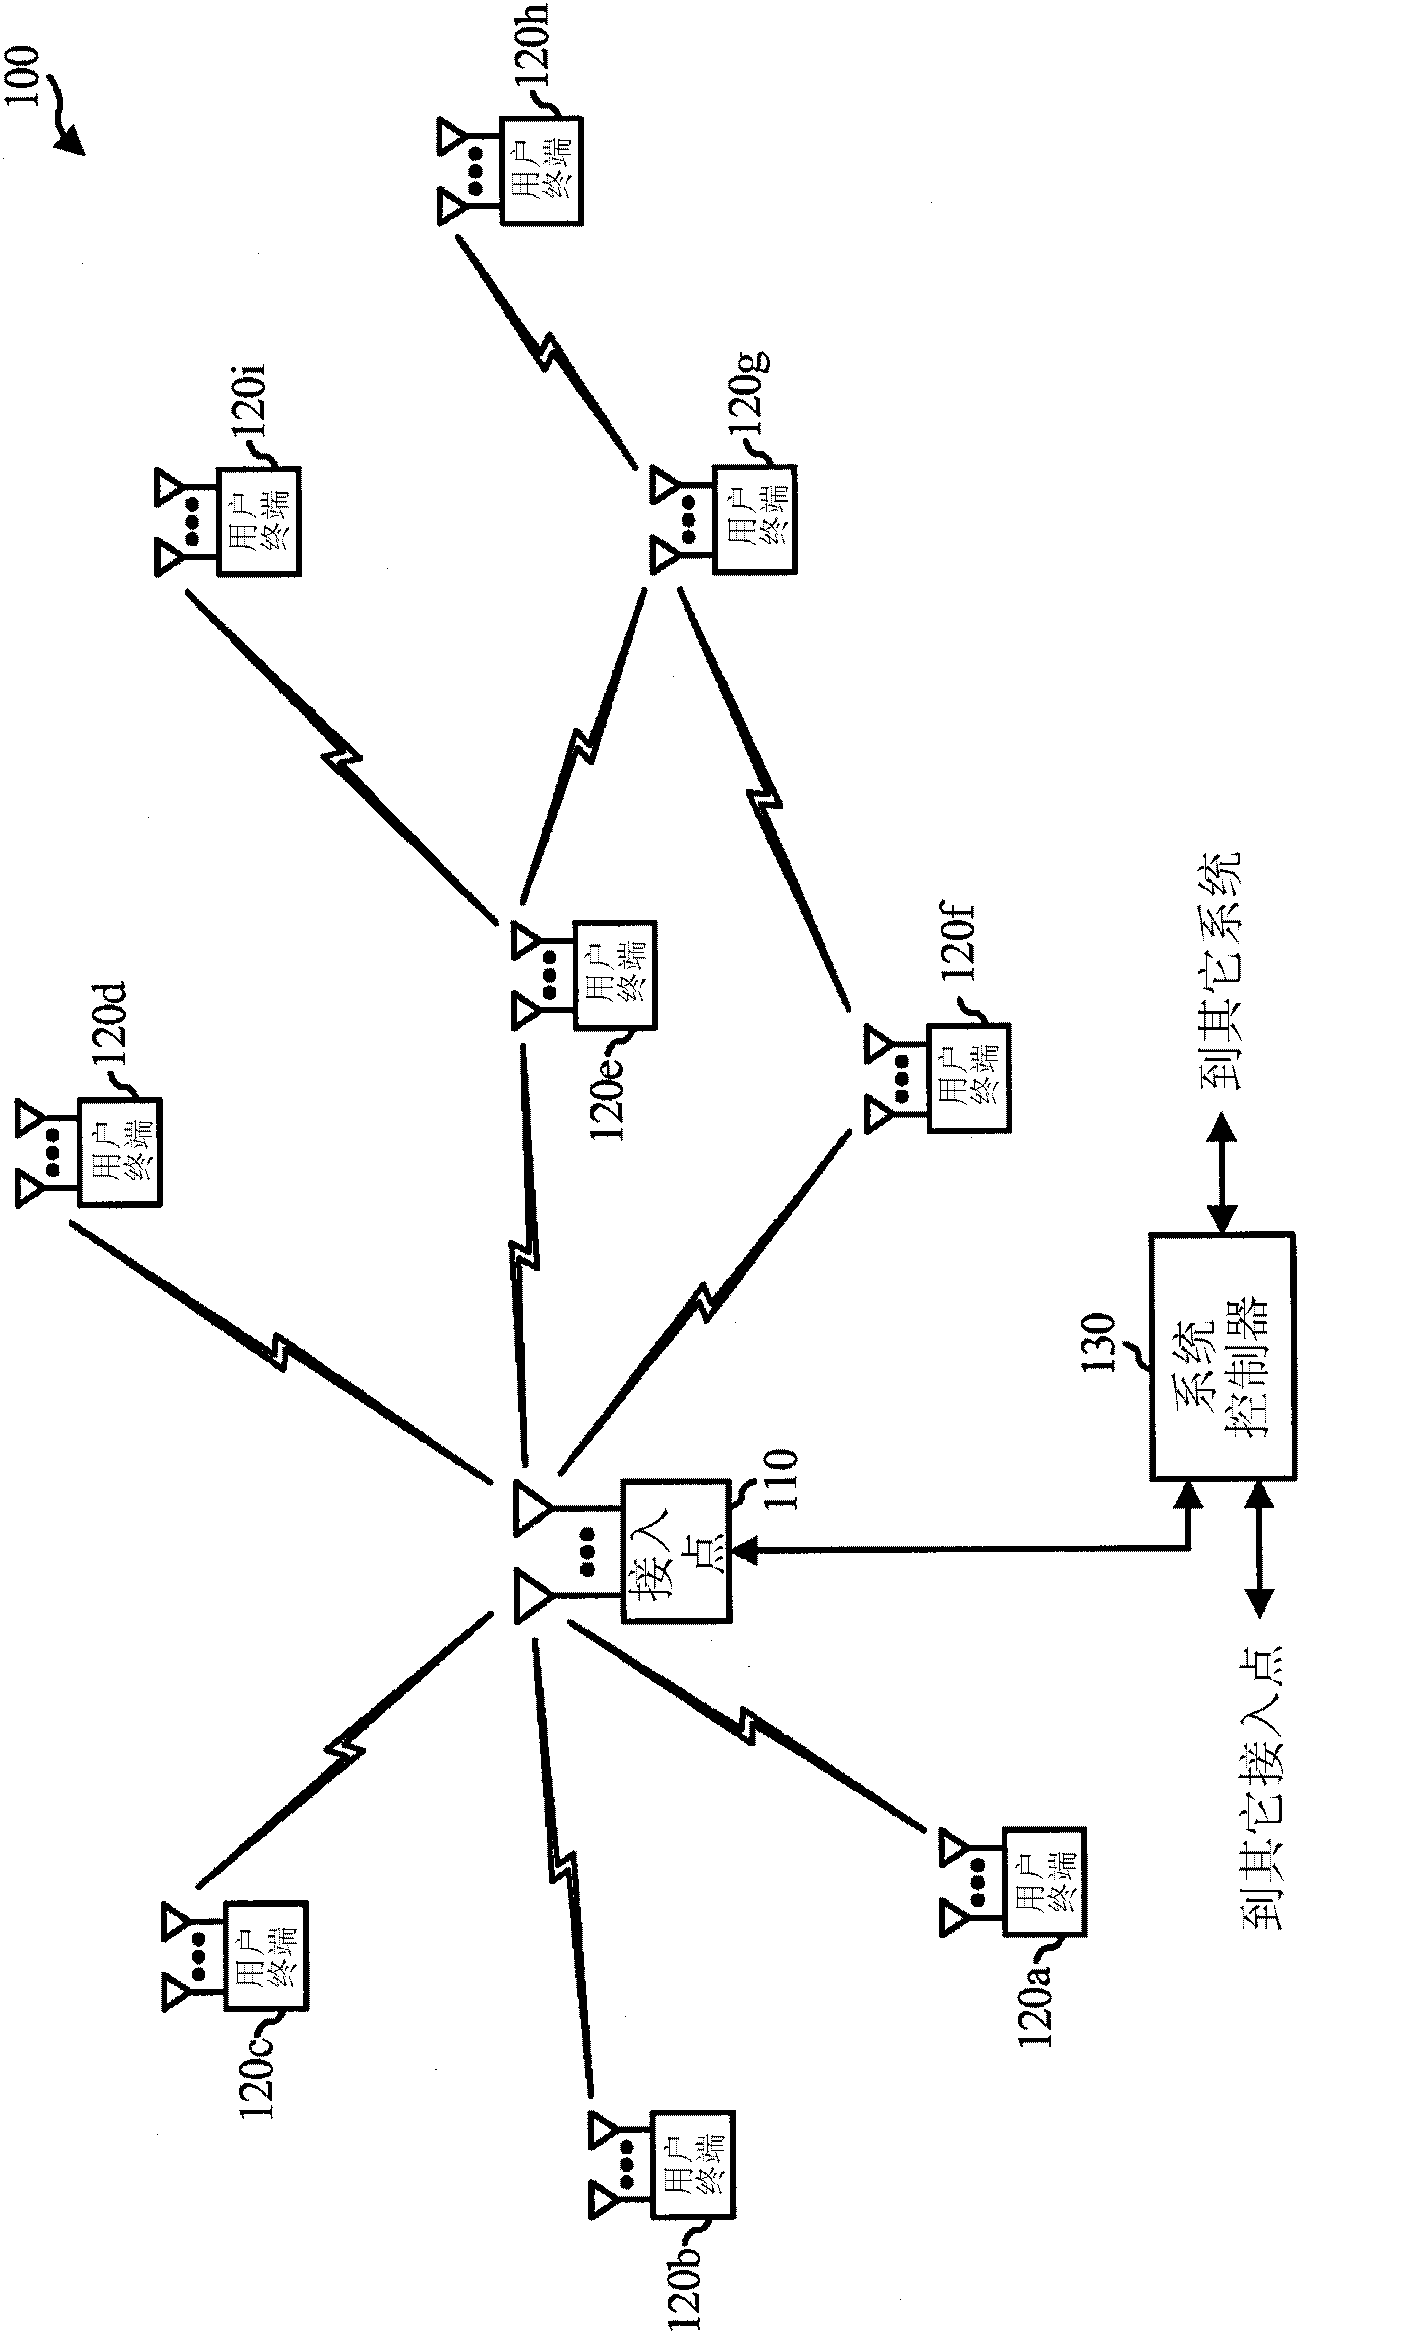 Protocol to support adaptive station-dependent channel state information feedback rate in multi-user communication systems